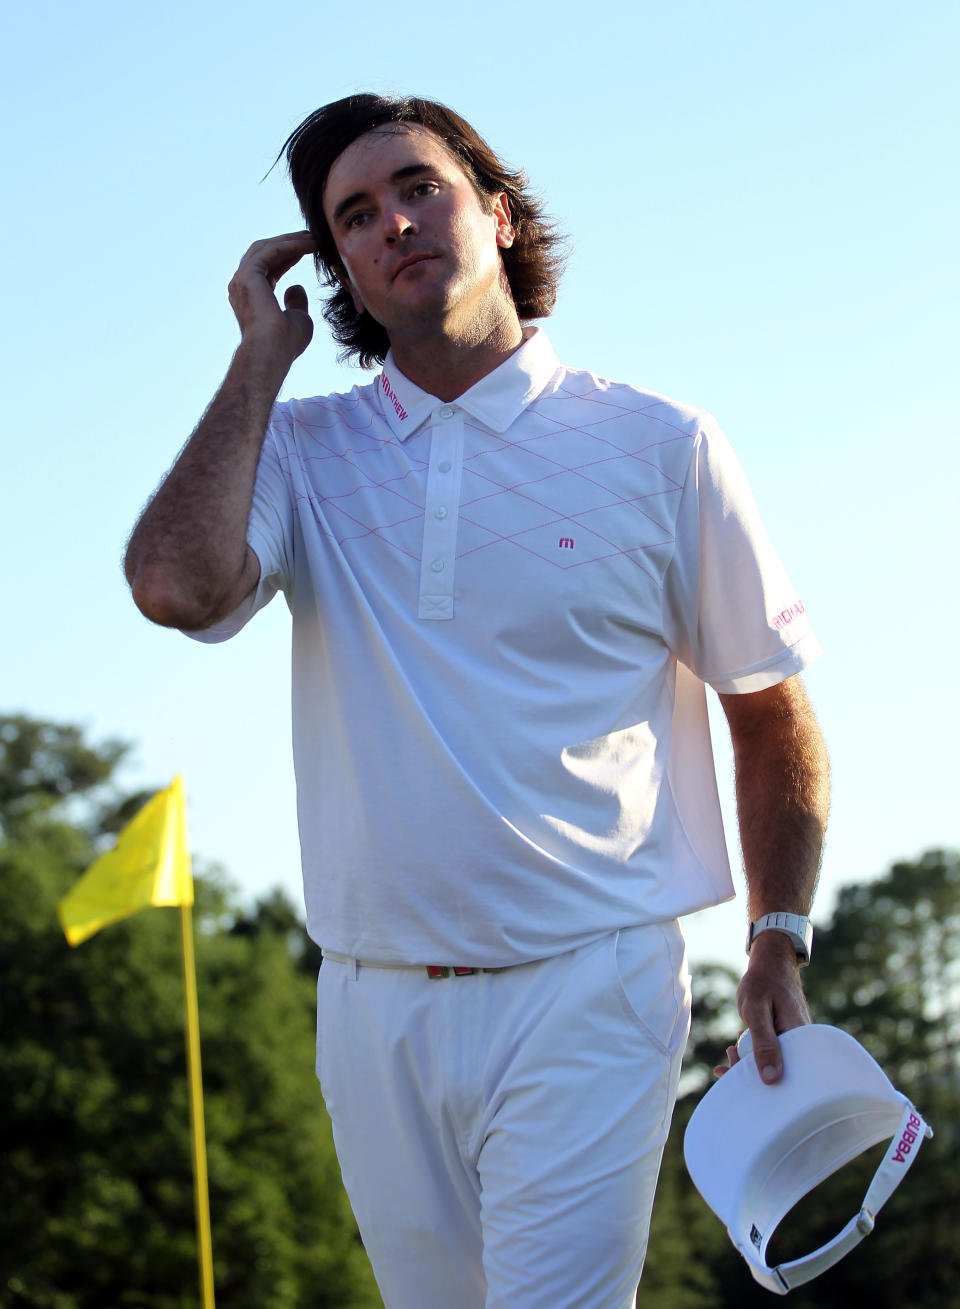 AUGUSTA, GA - APRIL 07: Bubba Watson of the United States walks off of the green after completing the third round of the 2012 Masters Tournament at Augusta National Golf Club on April 7, 2012 in Augusta, Georgia. (Photo by Jamie Squire/Getty Images)